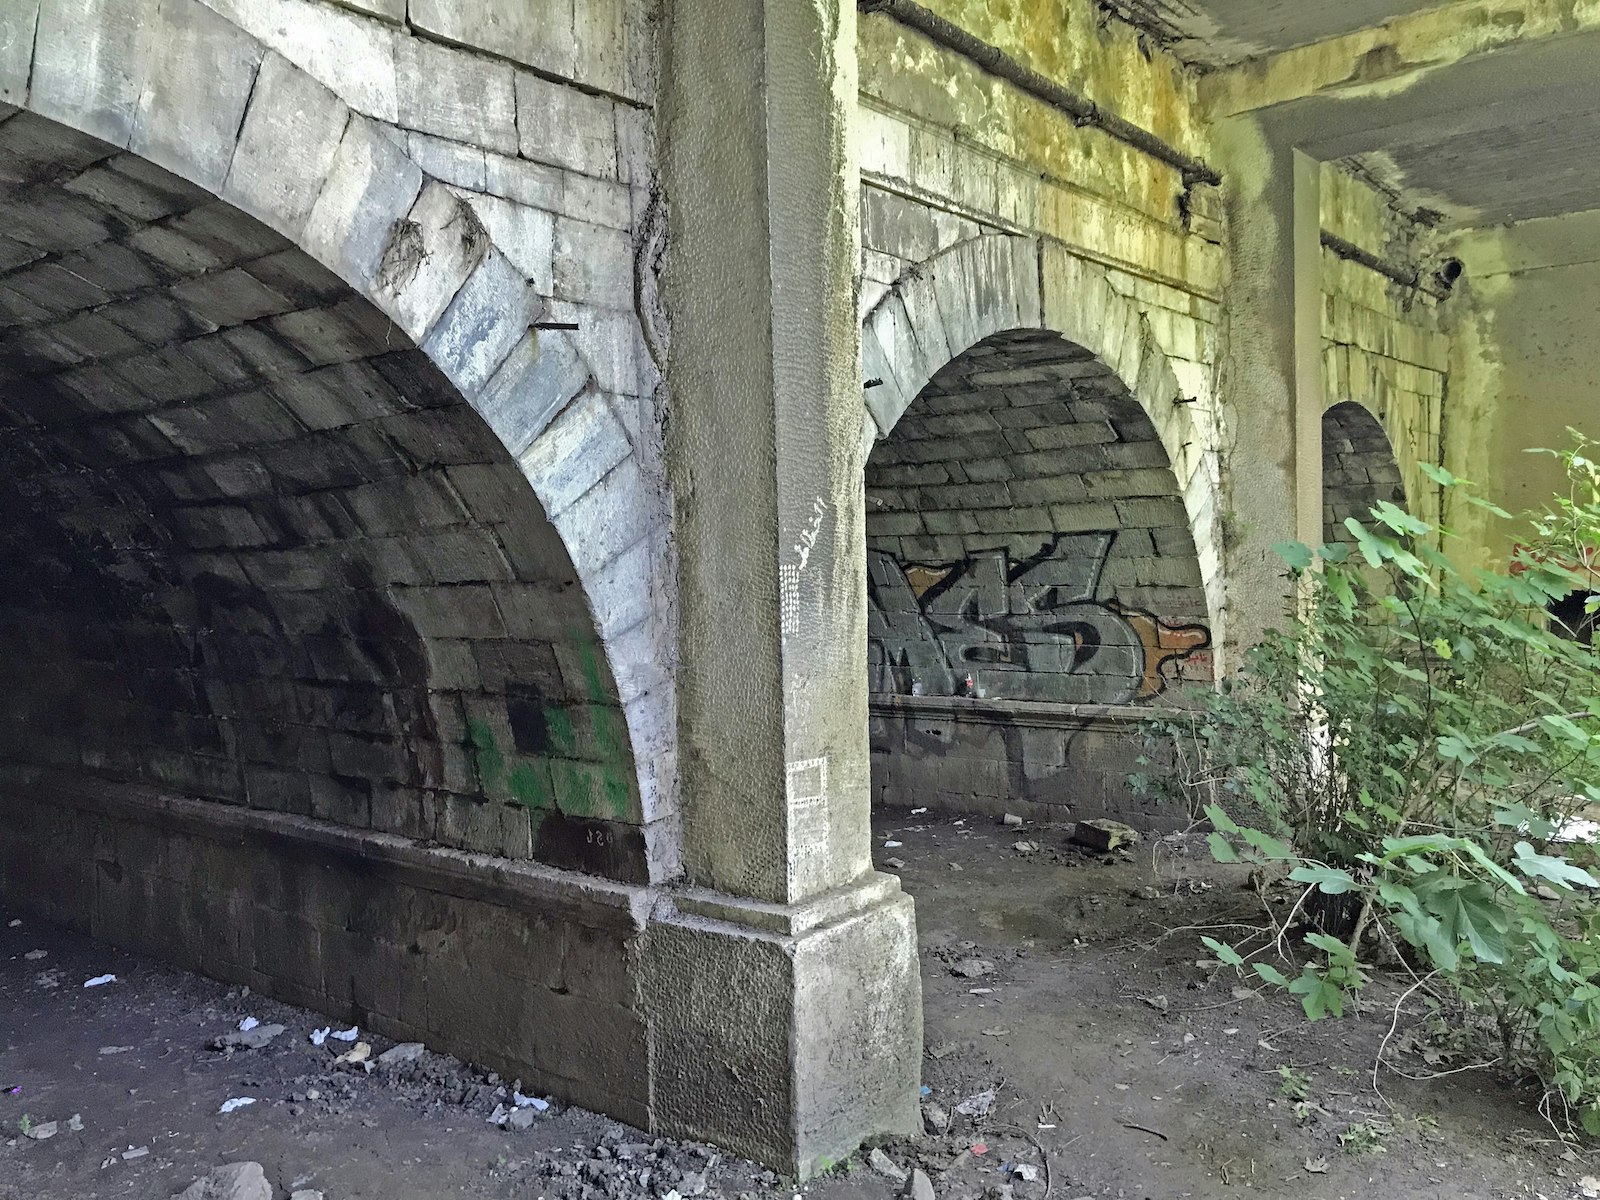 A graffitied three-tunnel bridge dating back to the days of Ott